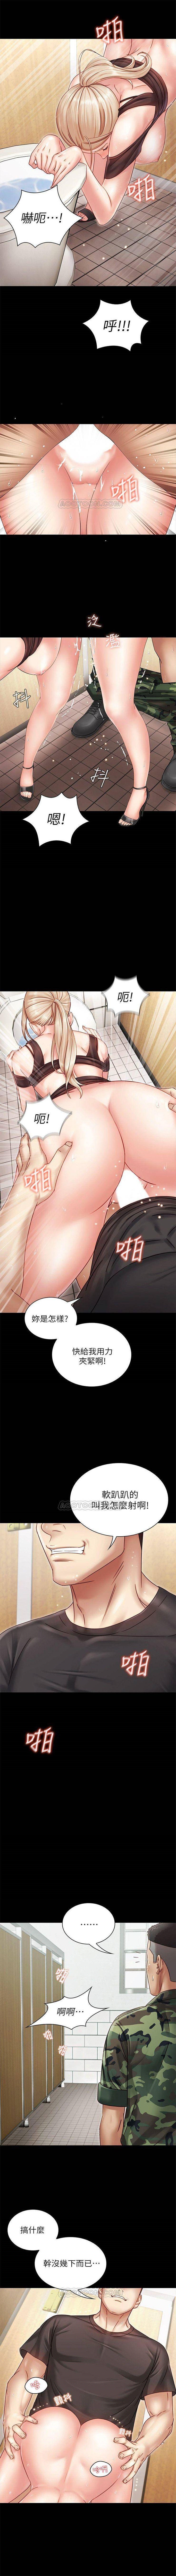 Hardcore Gay 妹妹的義務 1-34 官方中文（連載中） Eating Pussy - Page 12